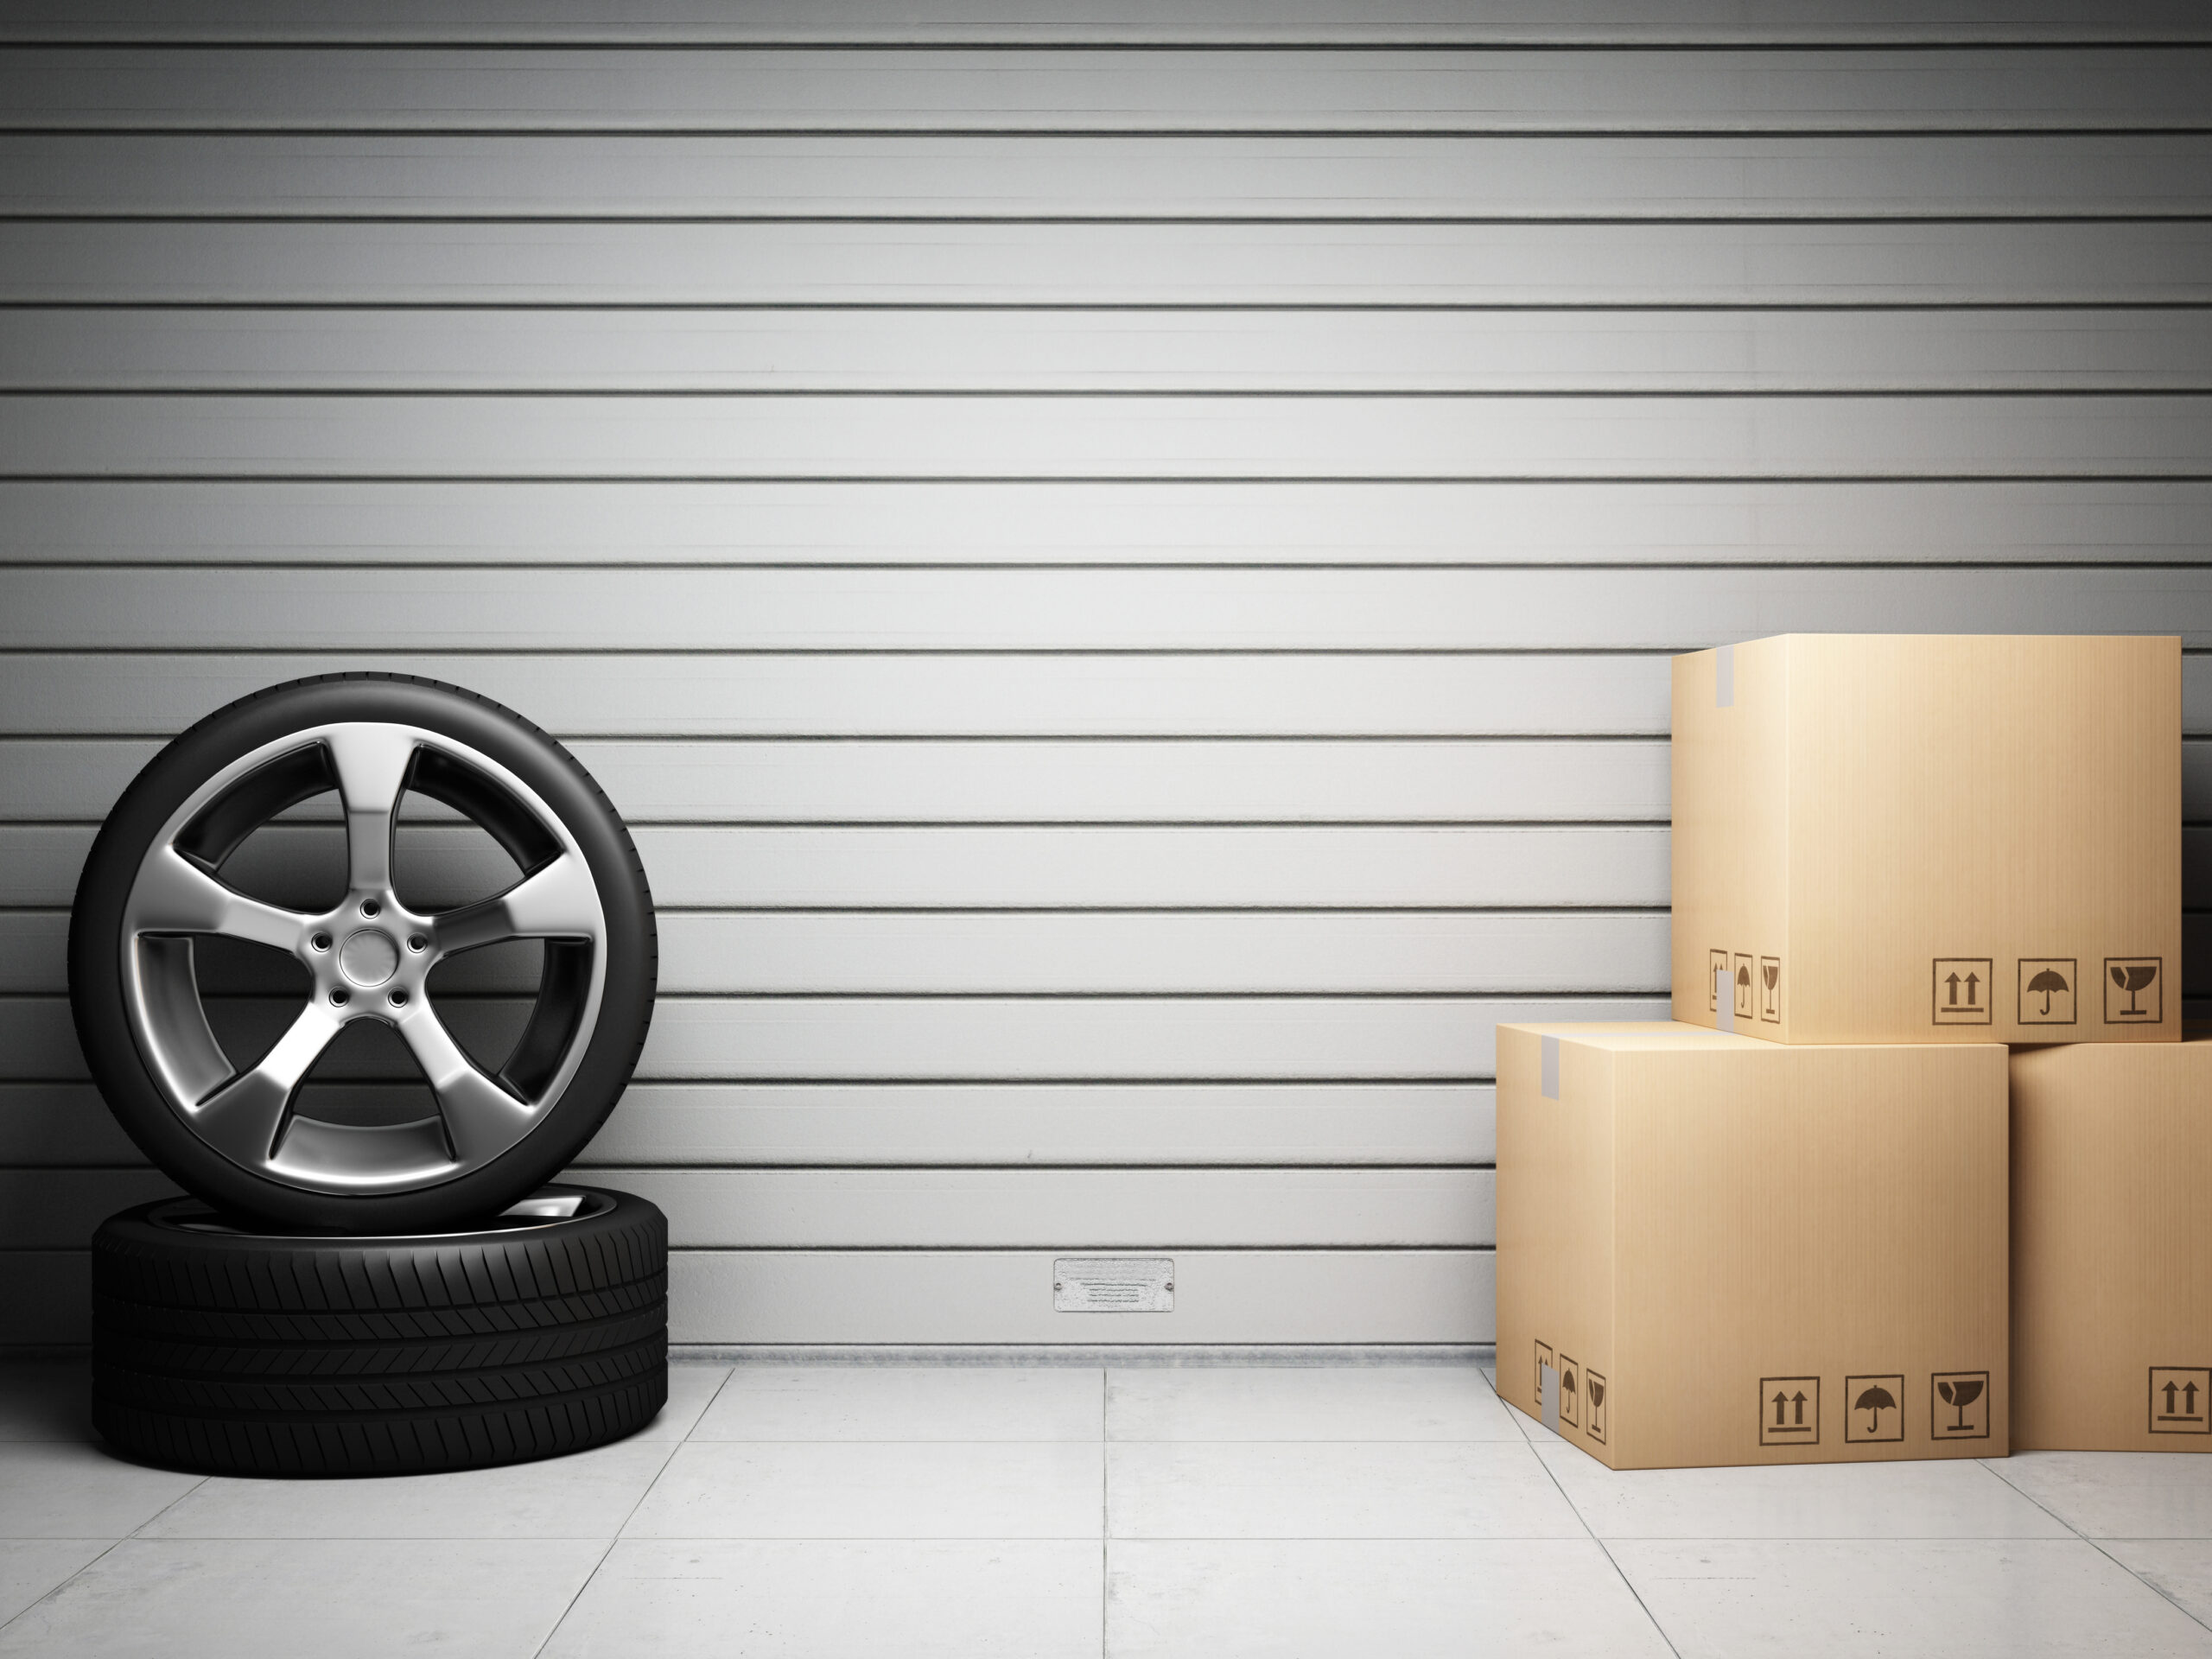 Car tires and storage boxes in front of roller shutter door